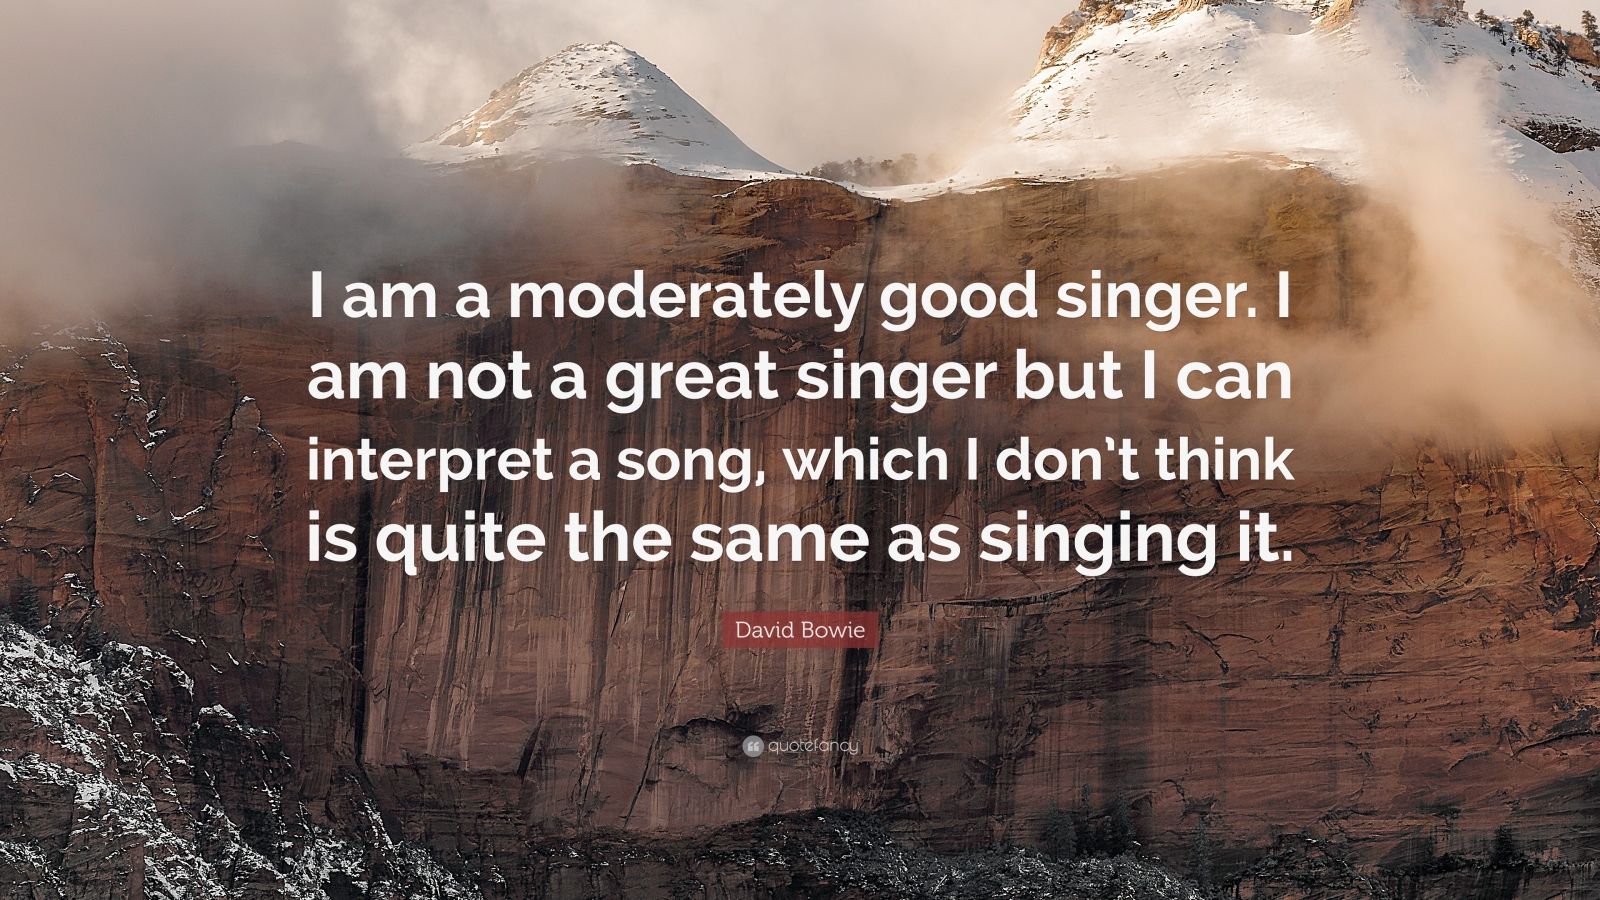 David Bowie Quote: “I am a moderately good singer. I am not a great